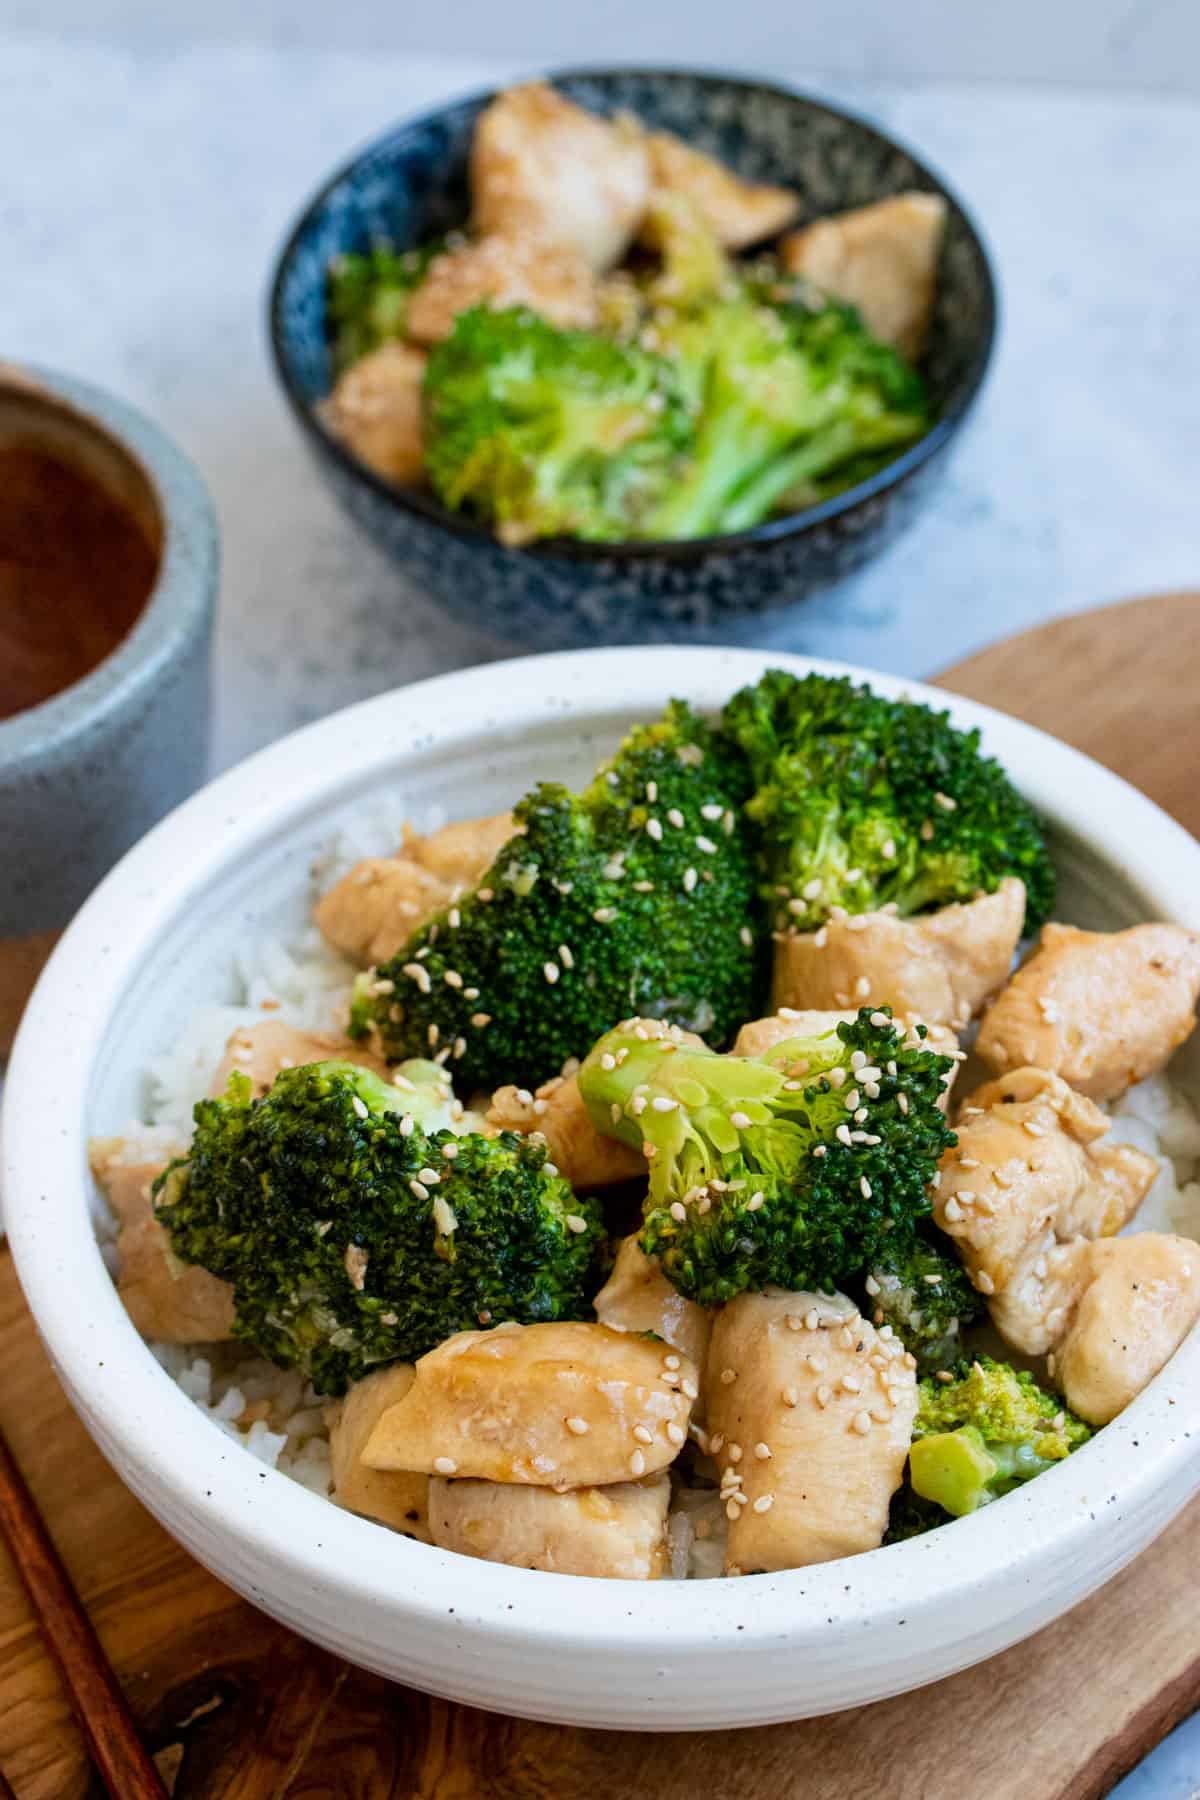 Chinese chicken and broccoli with toasted white sesame seeds.